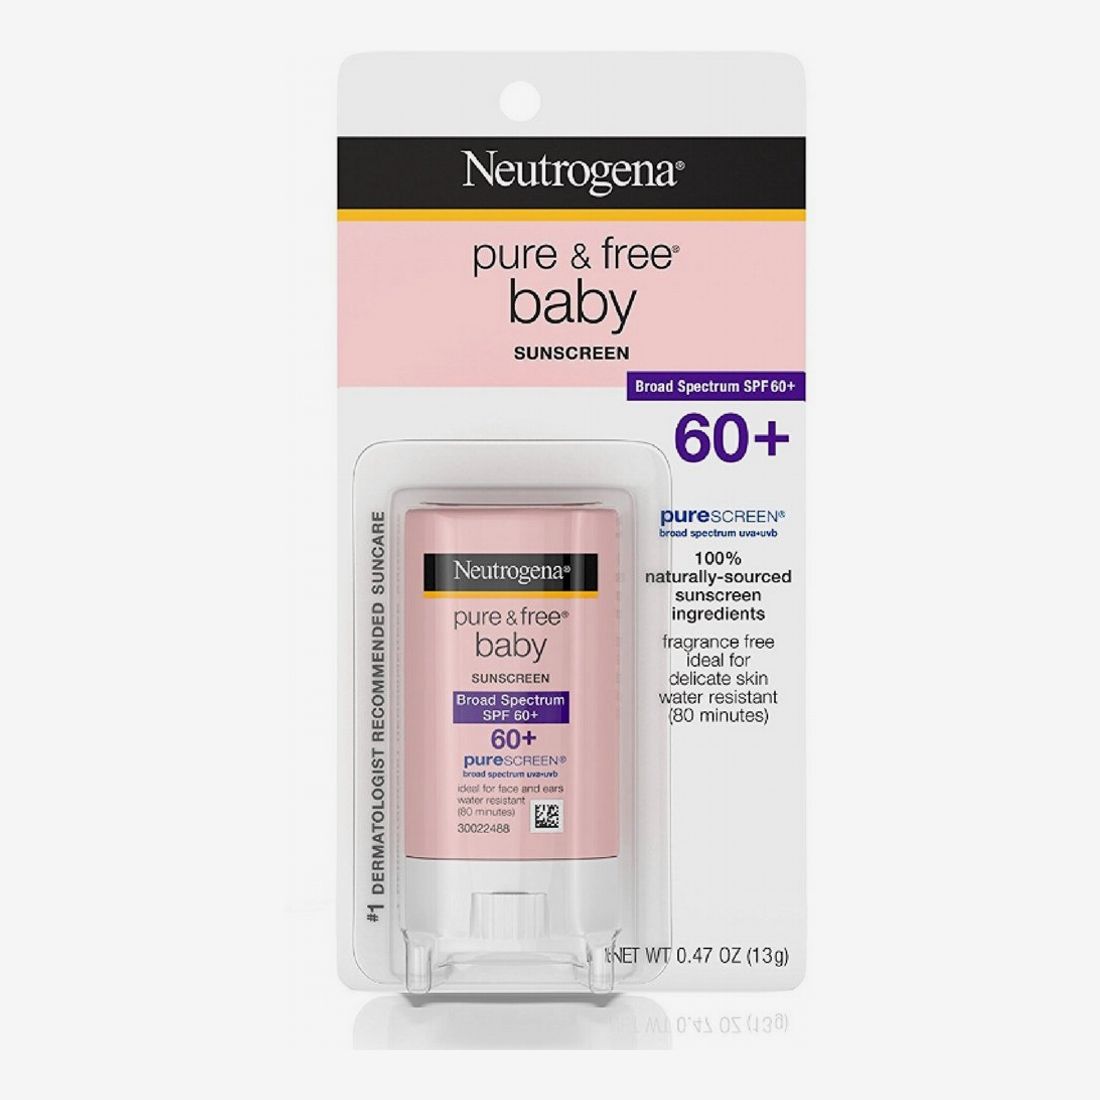 neutrogena free and clear baby sunscreen